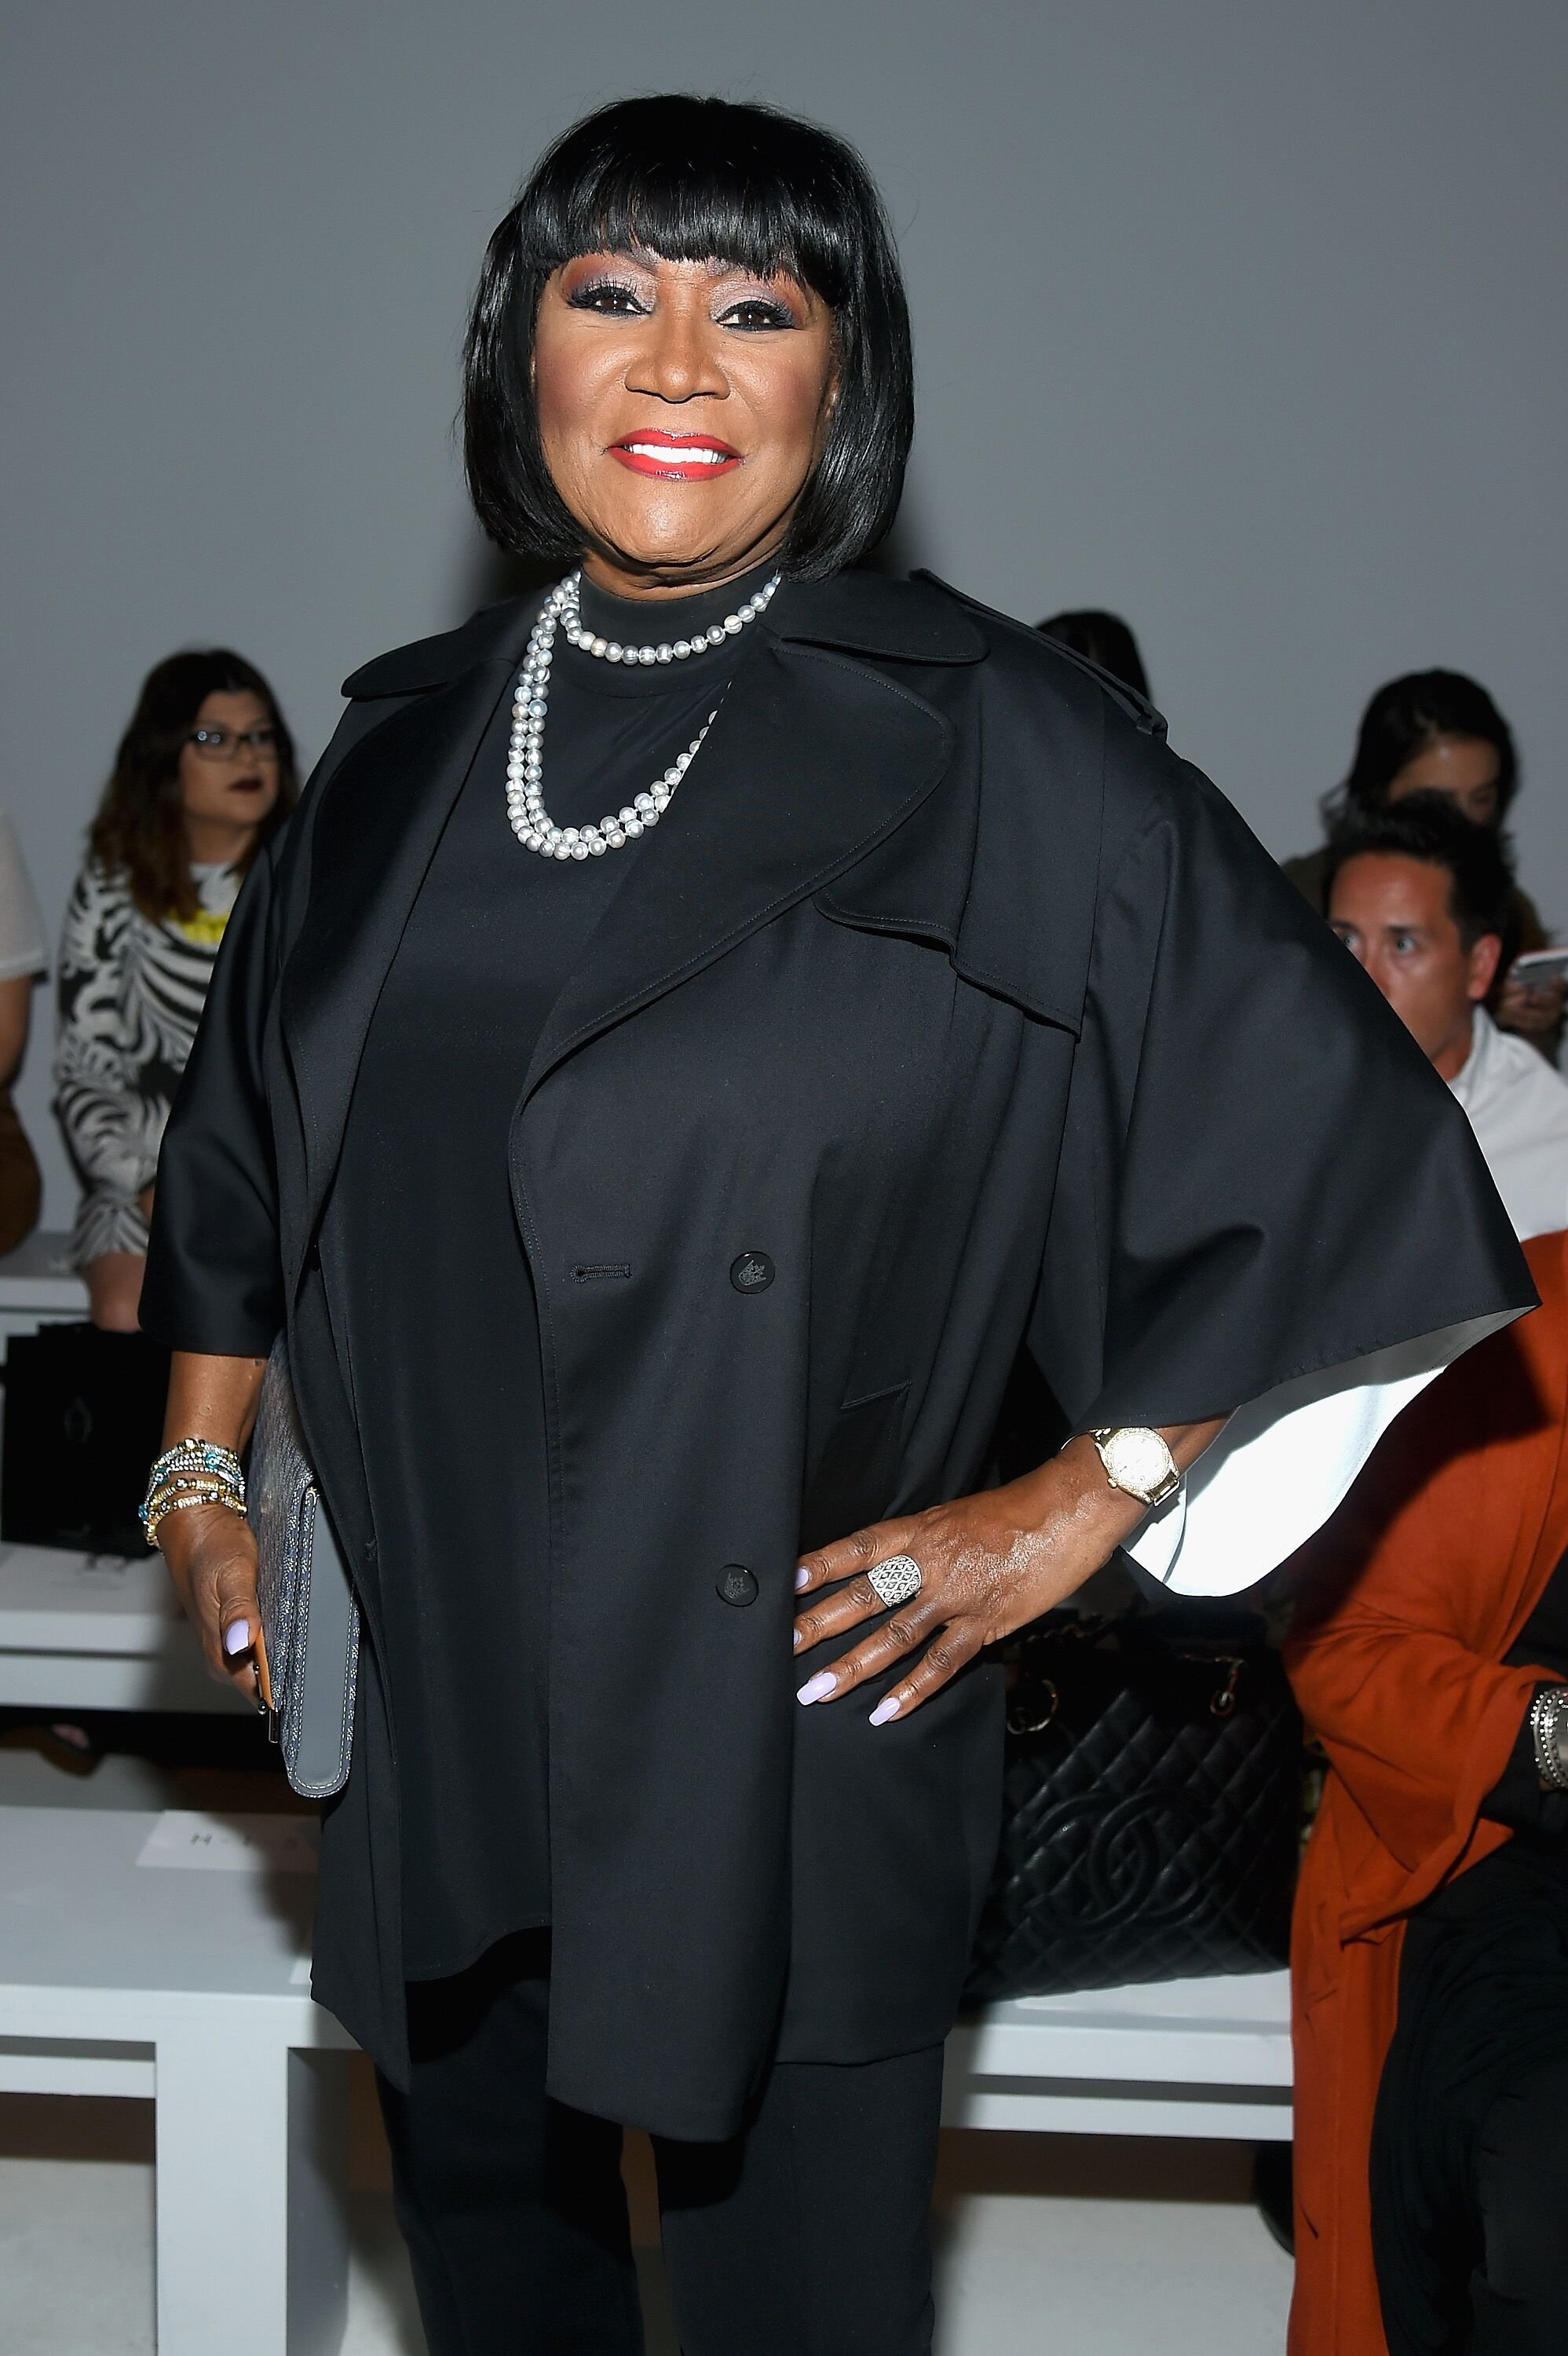 Patti LaBelle attends the Zang Toi fashion show during New York Fashion Week: The Shows at Gallery 3, Skylight Clarkson Sq on September 13, 2017 in New York City. | Source: Getty Images